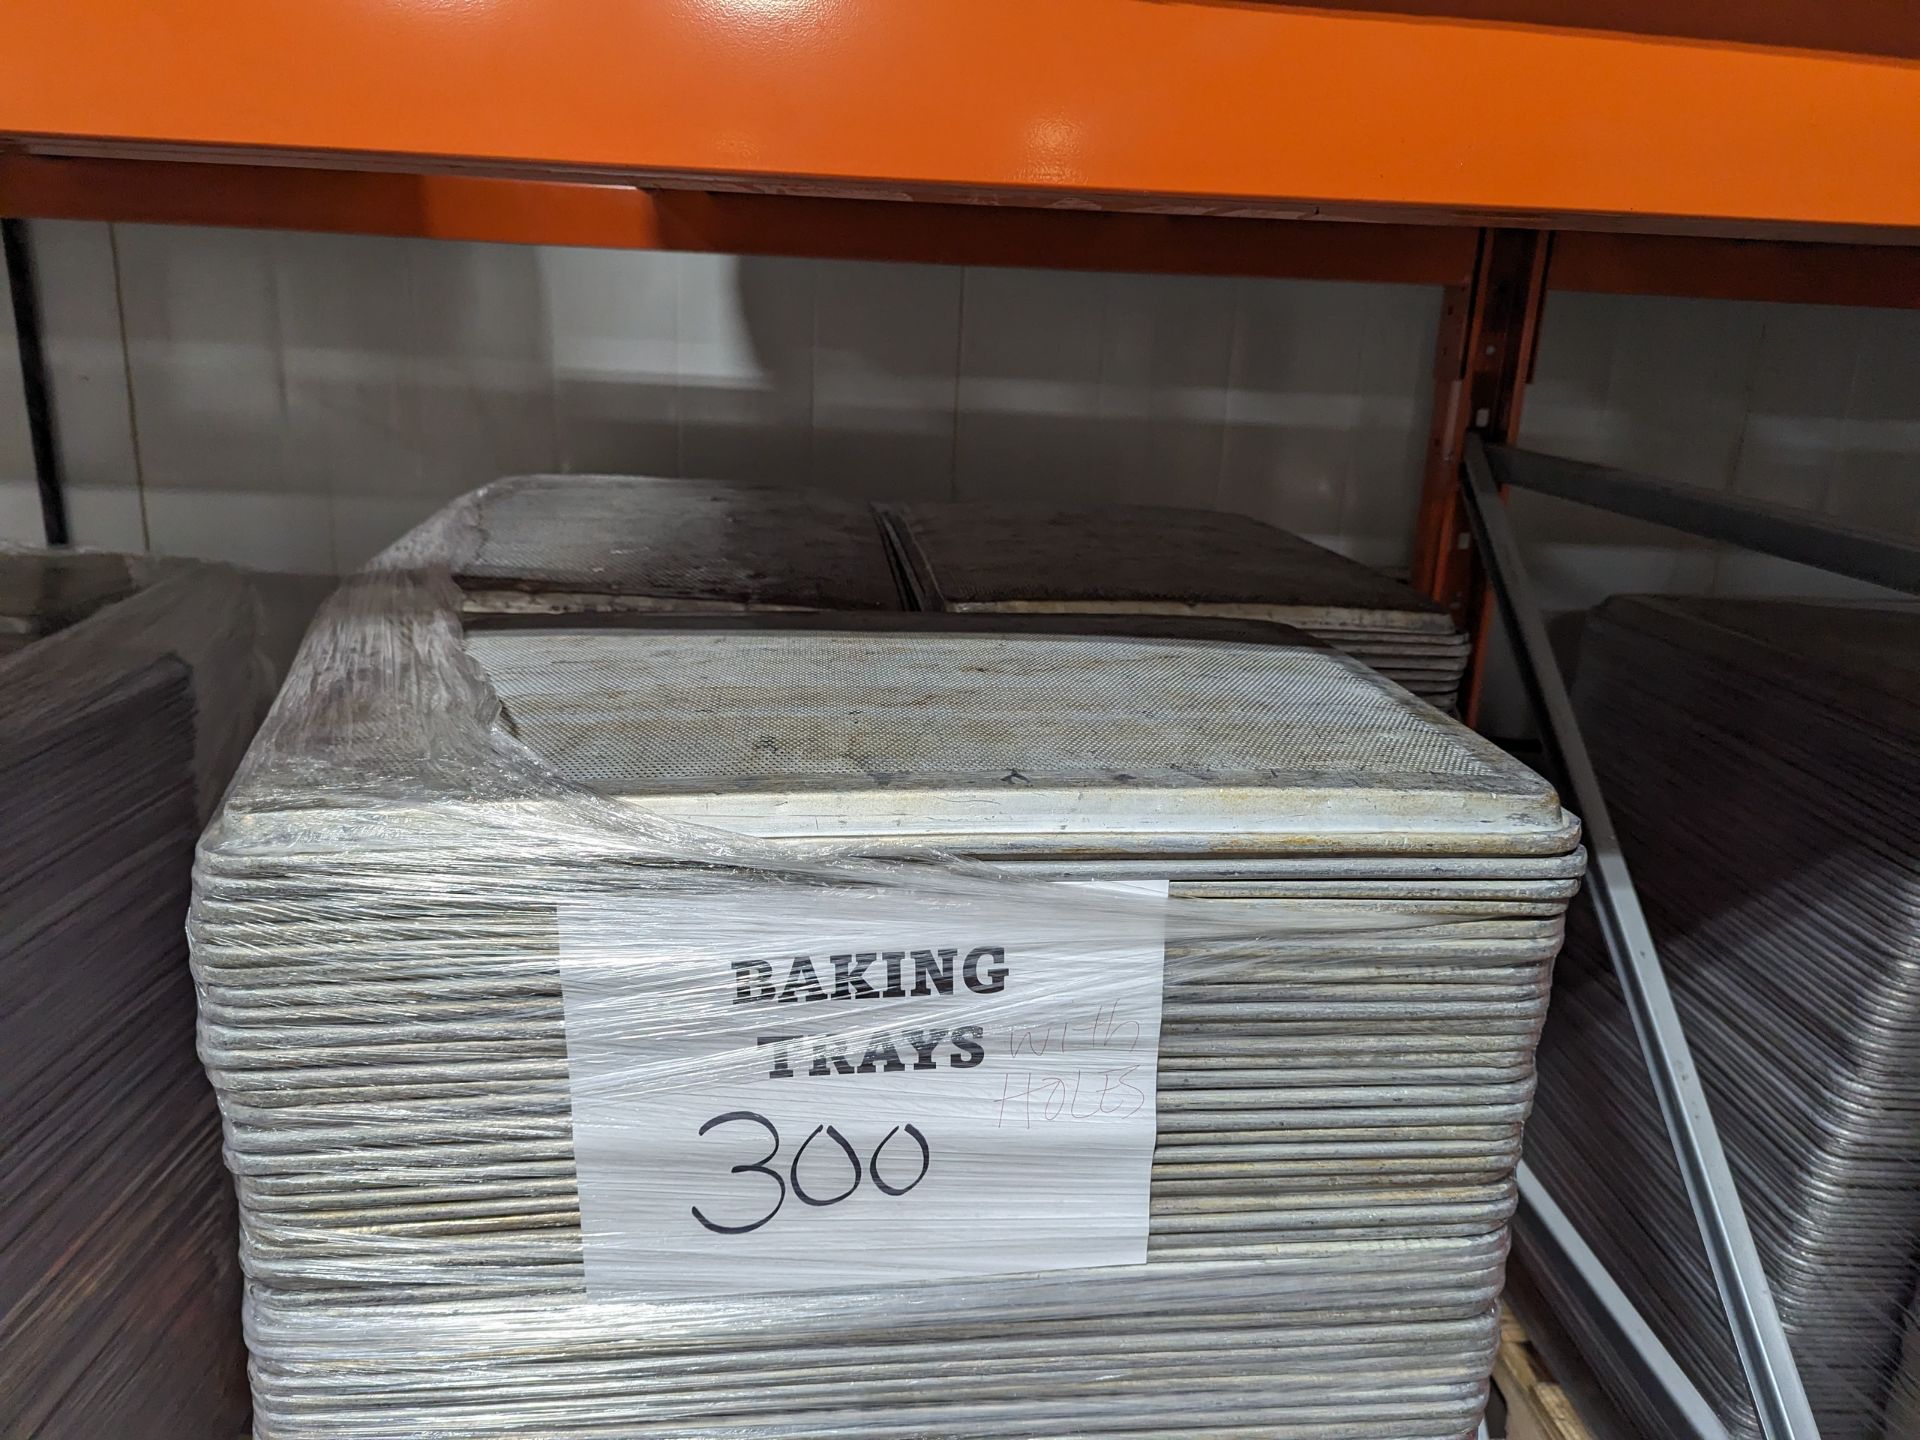 Lot of 300 Perforated Baking Sheets, Dimensions LxWxH: 48x40x40 - Image 2 of 3